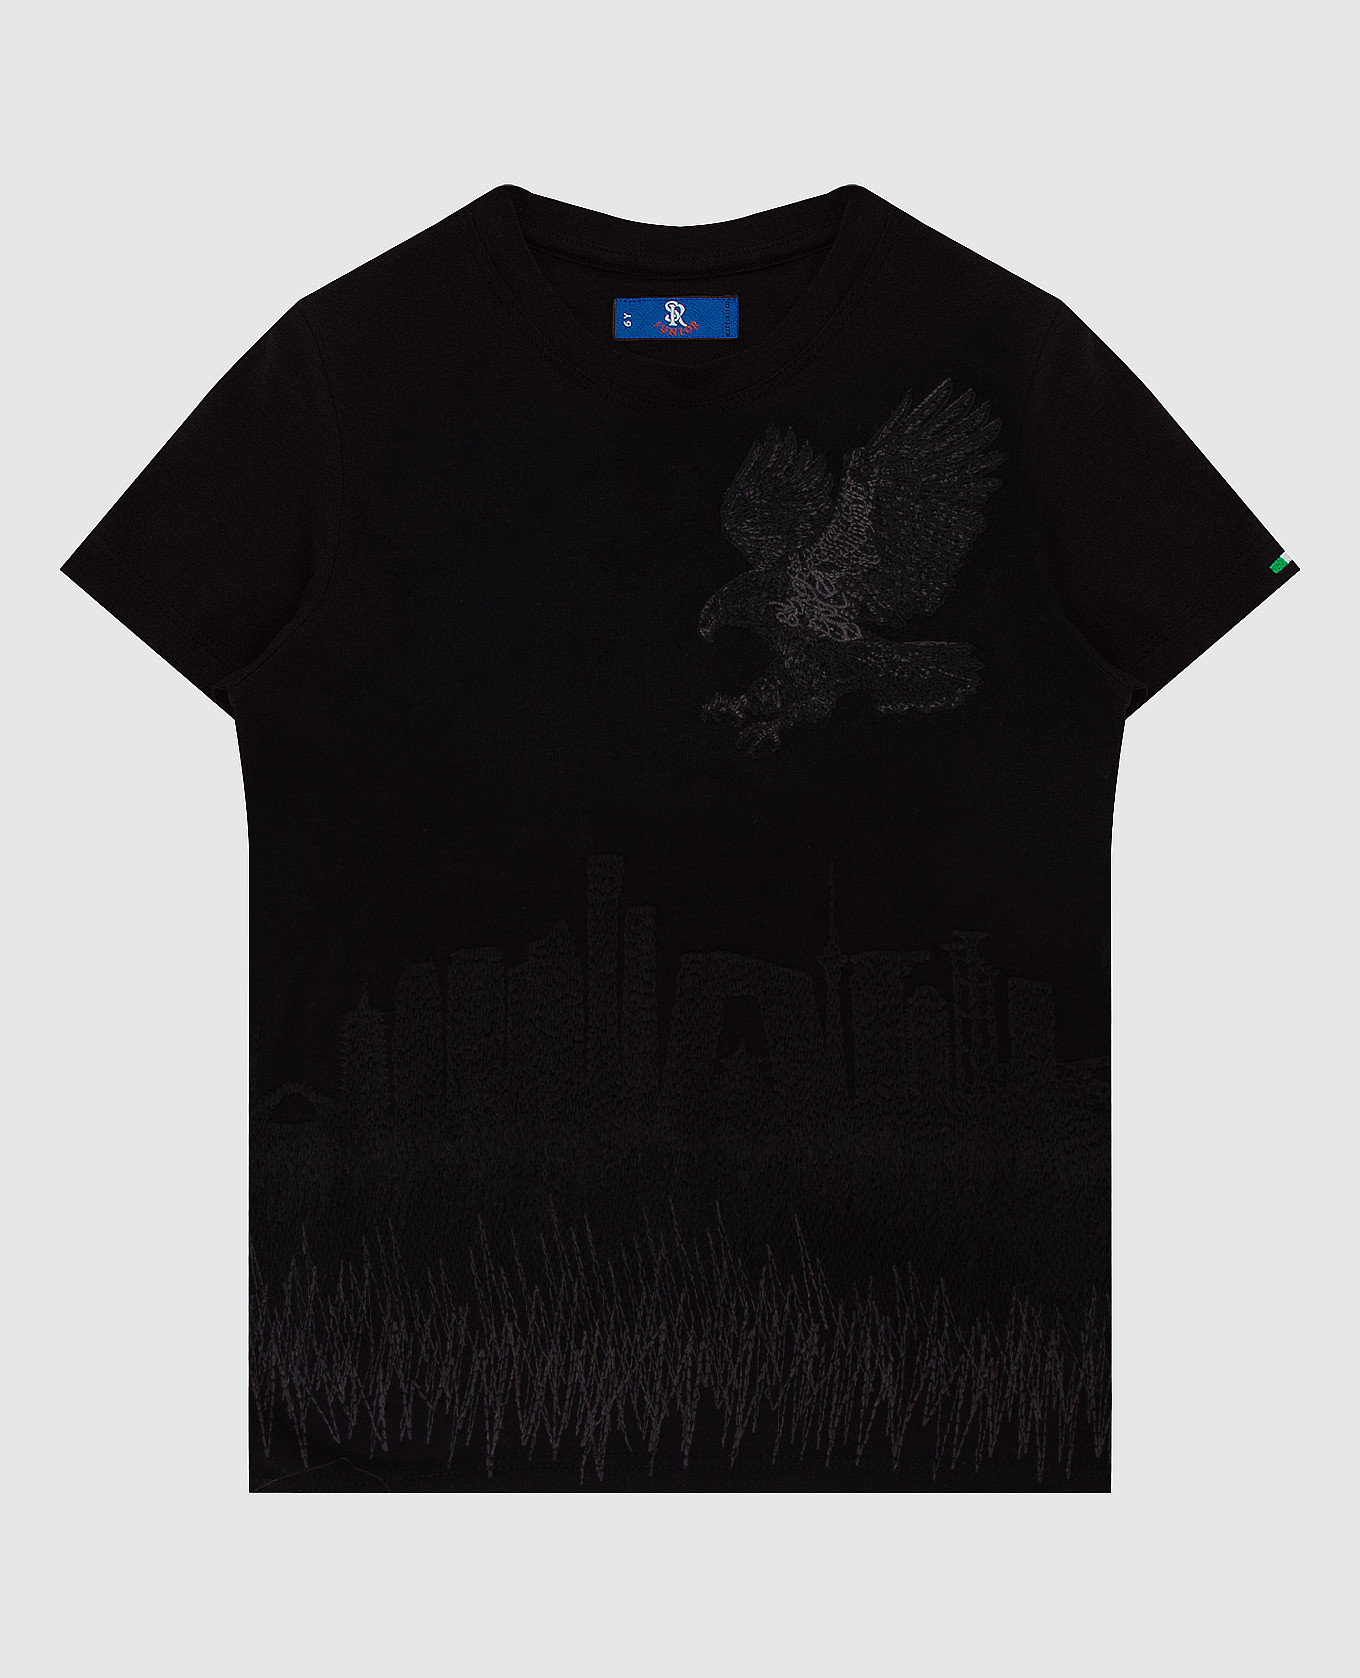 Children's black t-shirt with embroidery